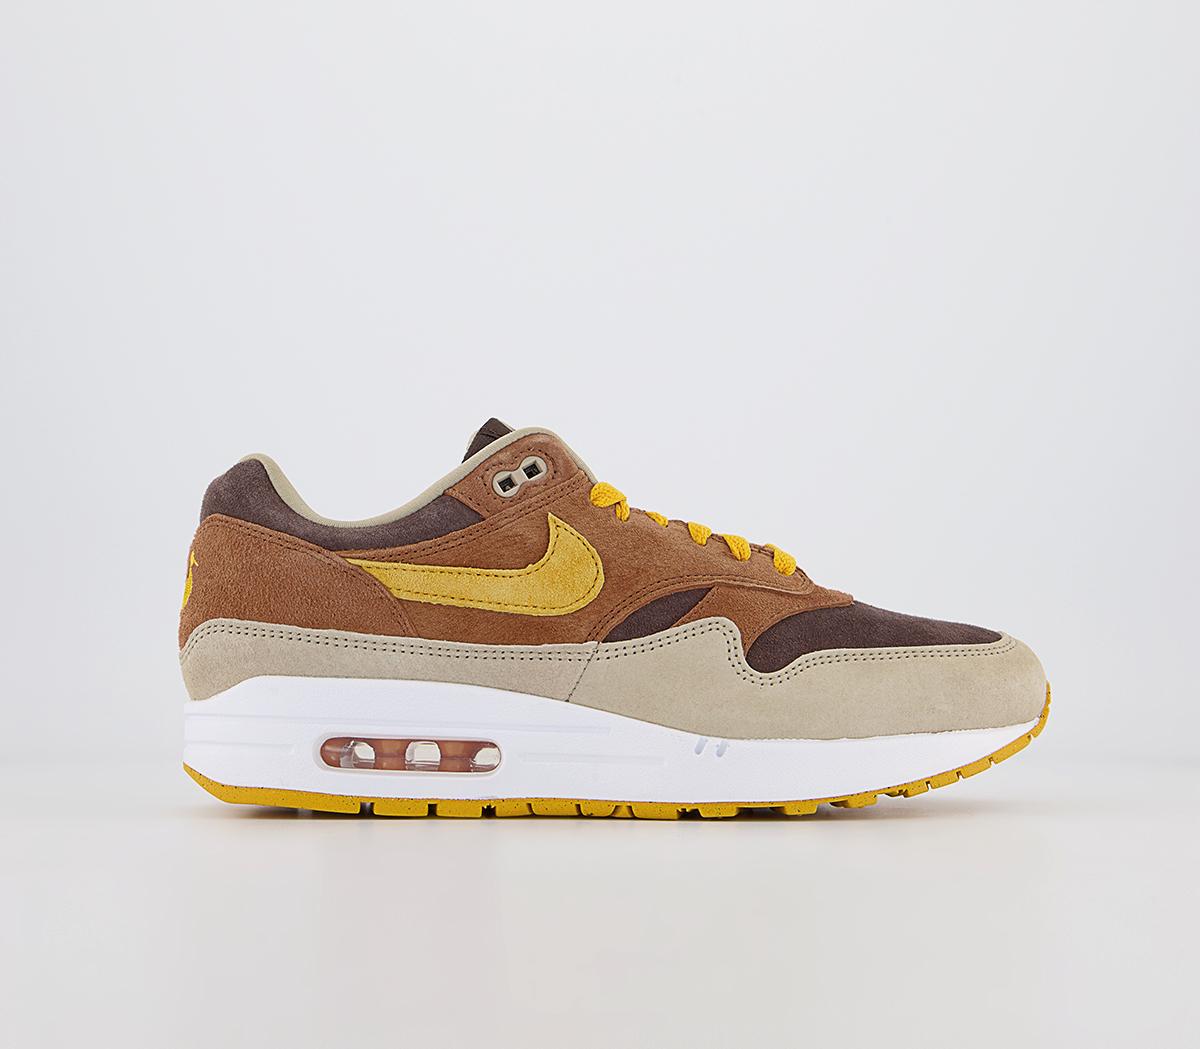 Nike Womens Air Max 1 Trainers Pecan Yellow Ochre Baroque Brown Suede, 4